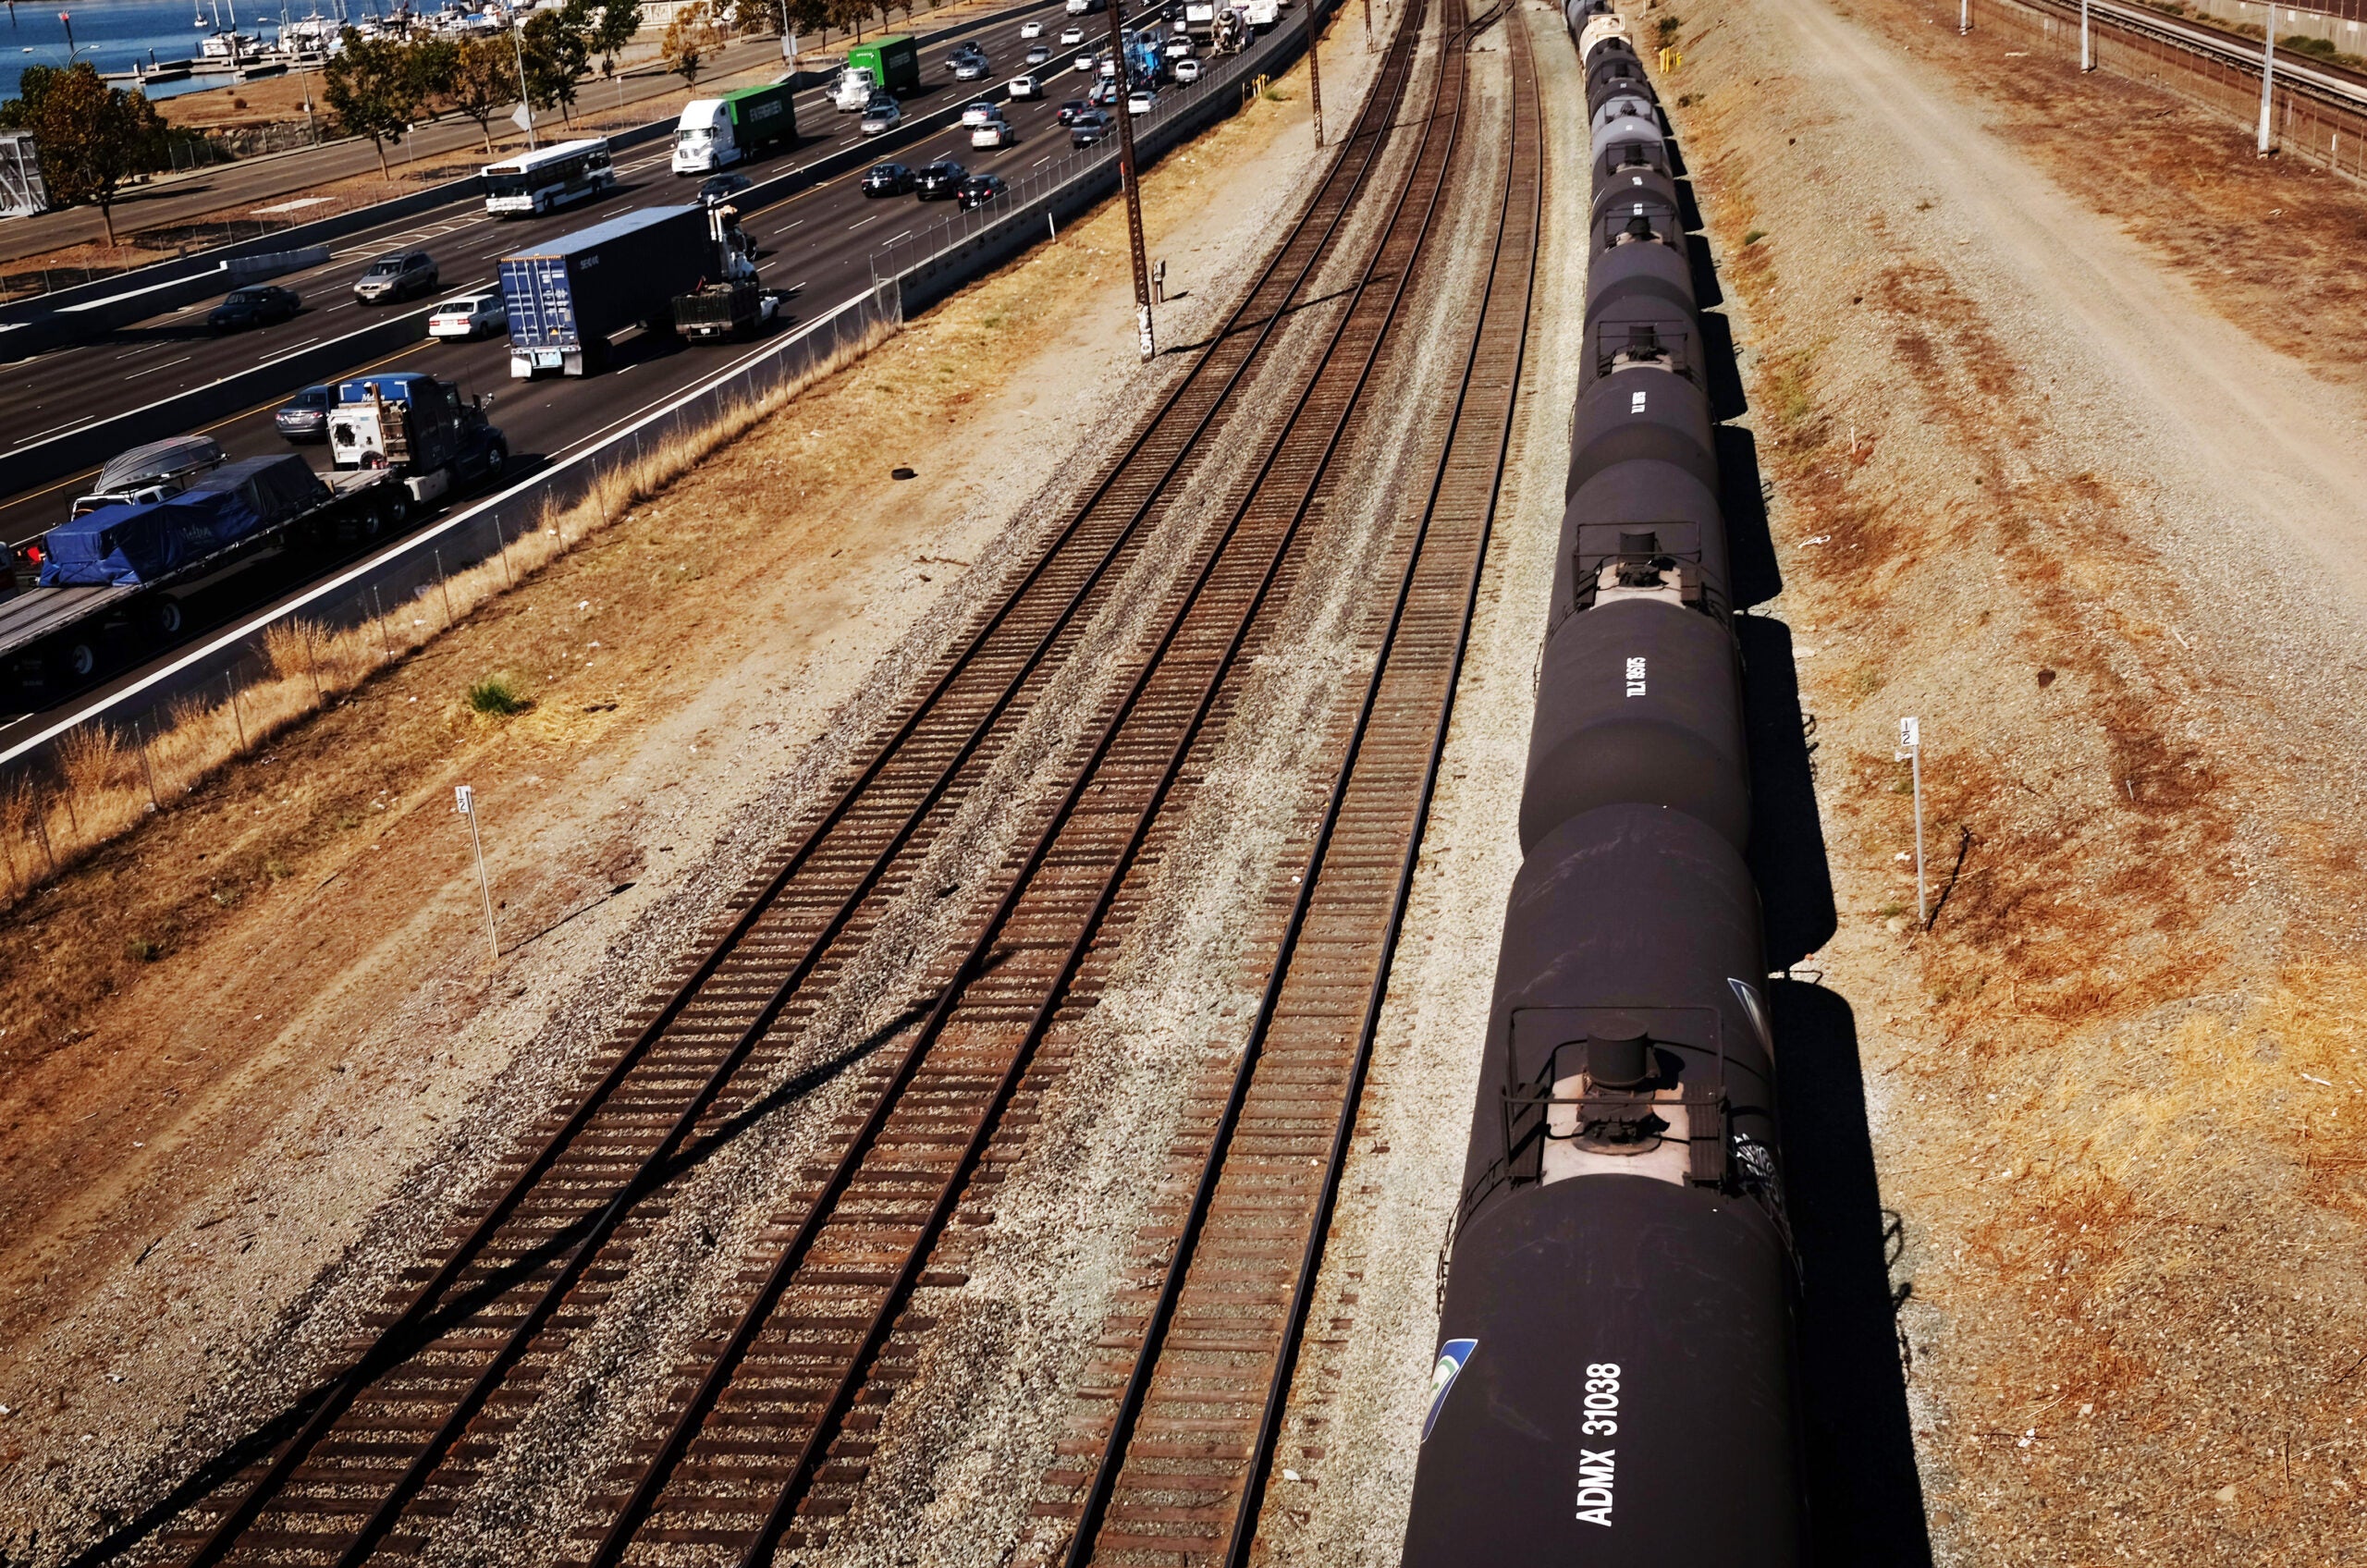 A train used for the transport of crude oil in California.